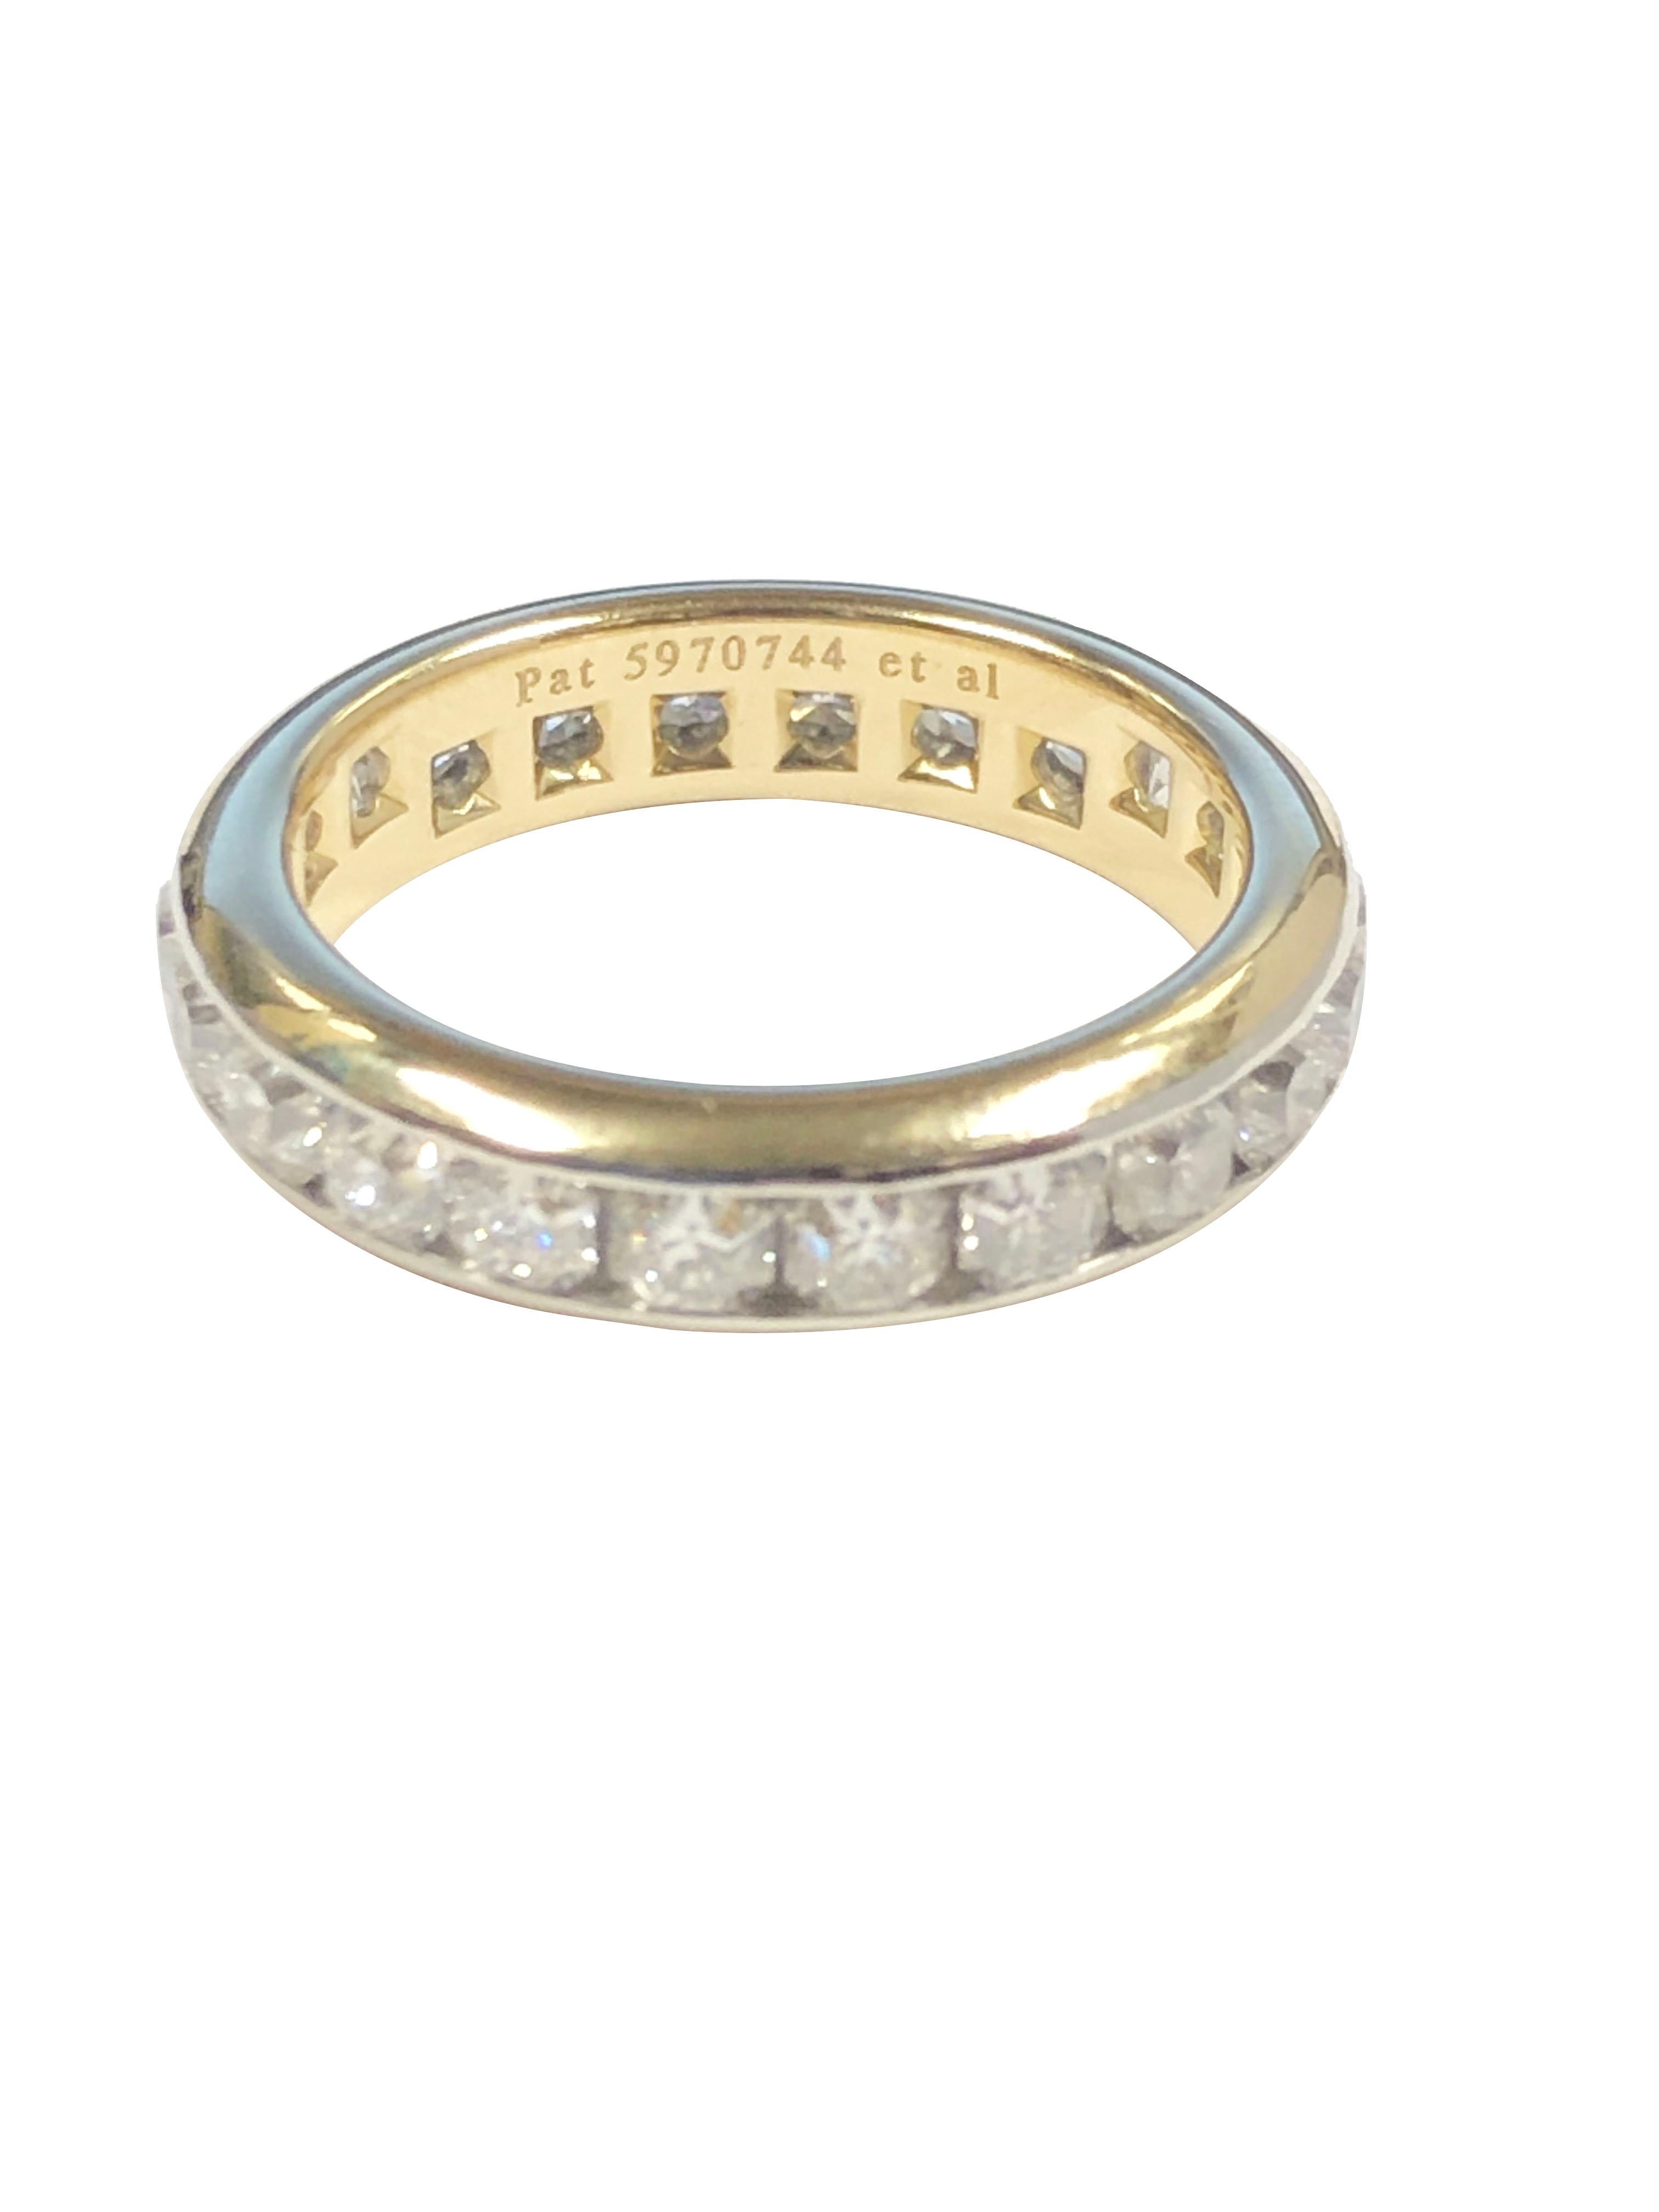 Tiffany & Company Platinum and 18k Lucida Diamond Eternity Band Ring In Excellent Condition For Sale In Chicago, IL